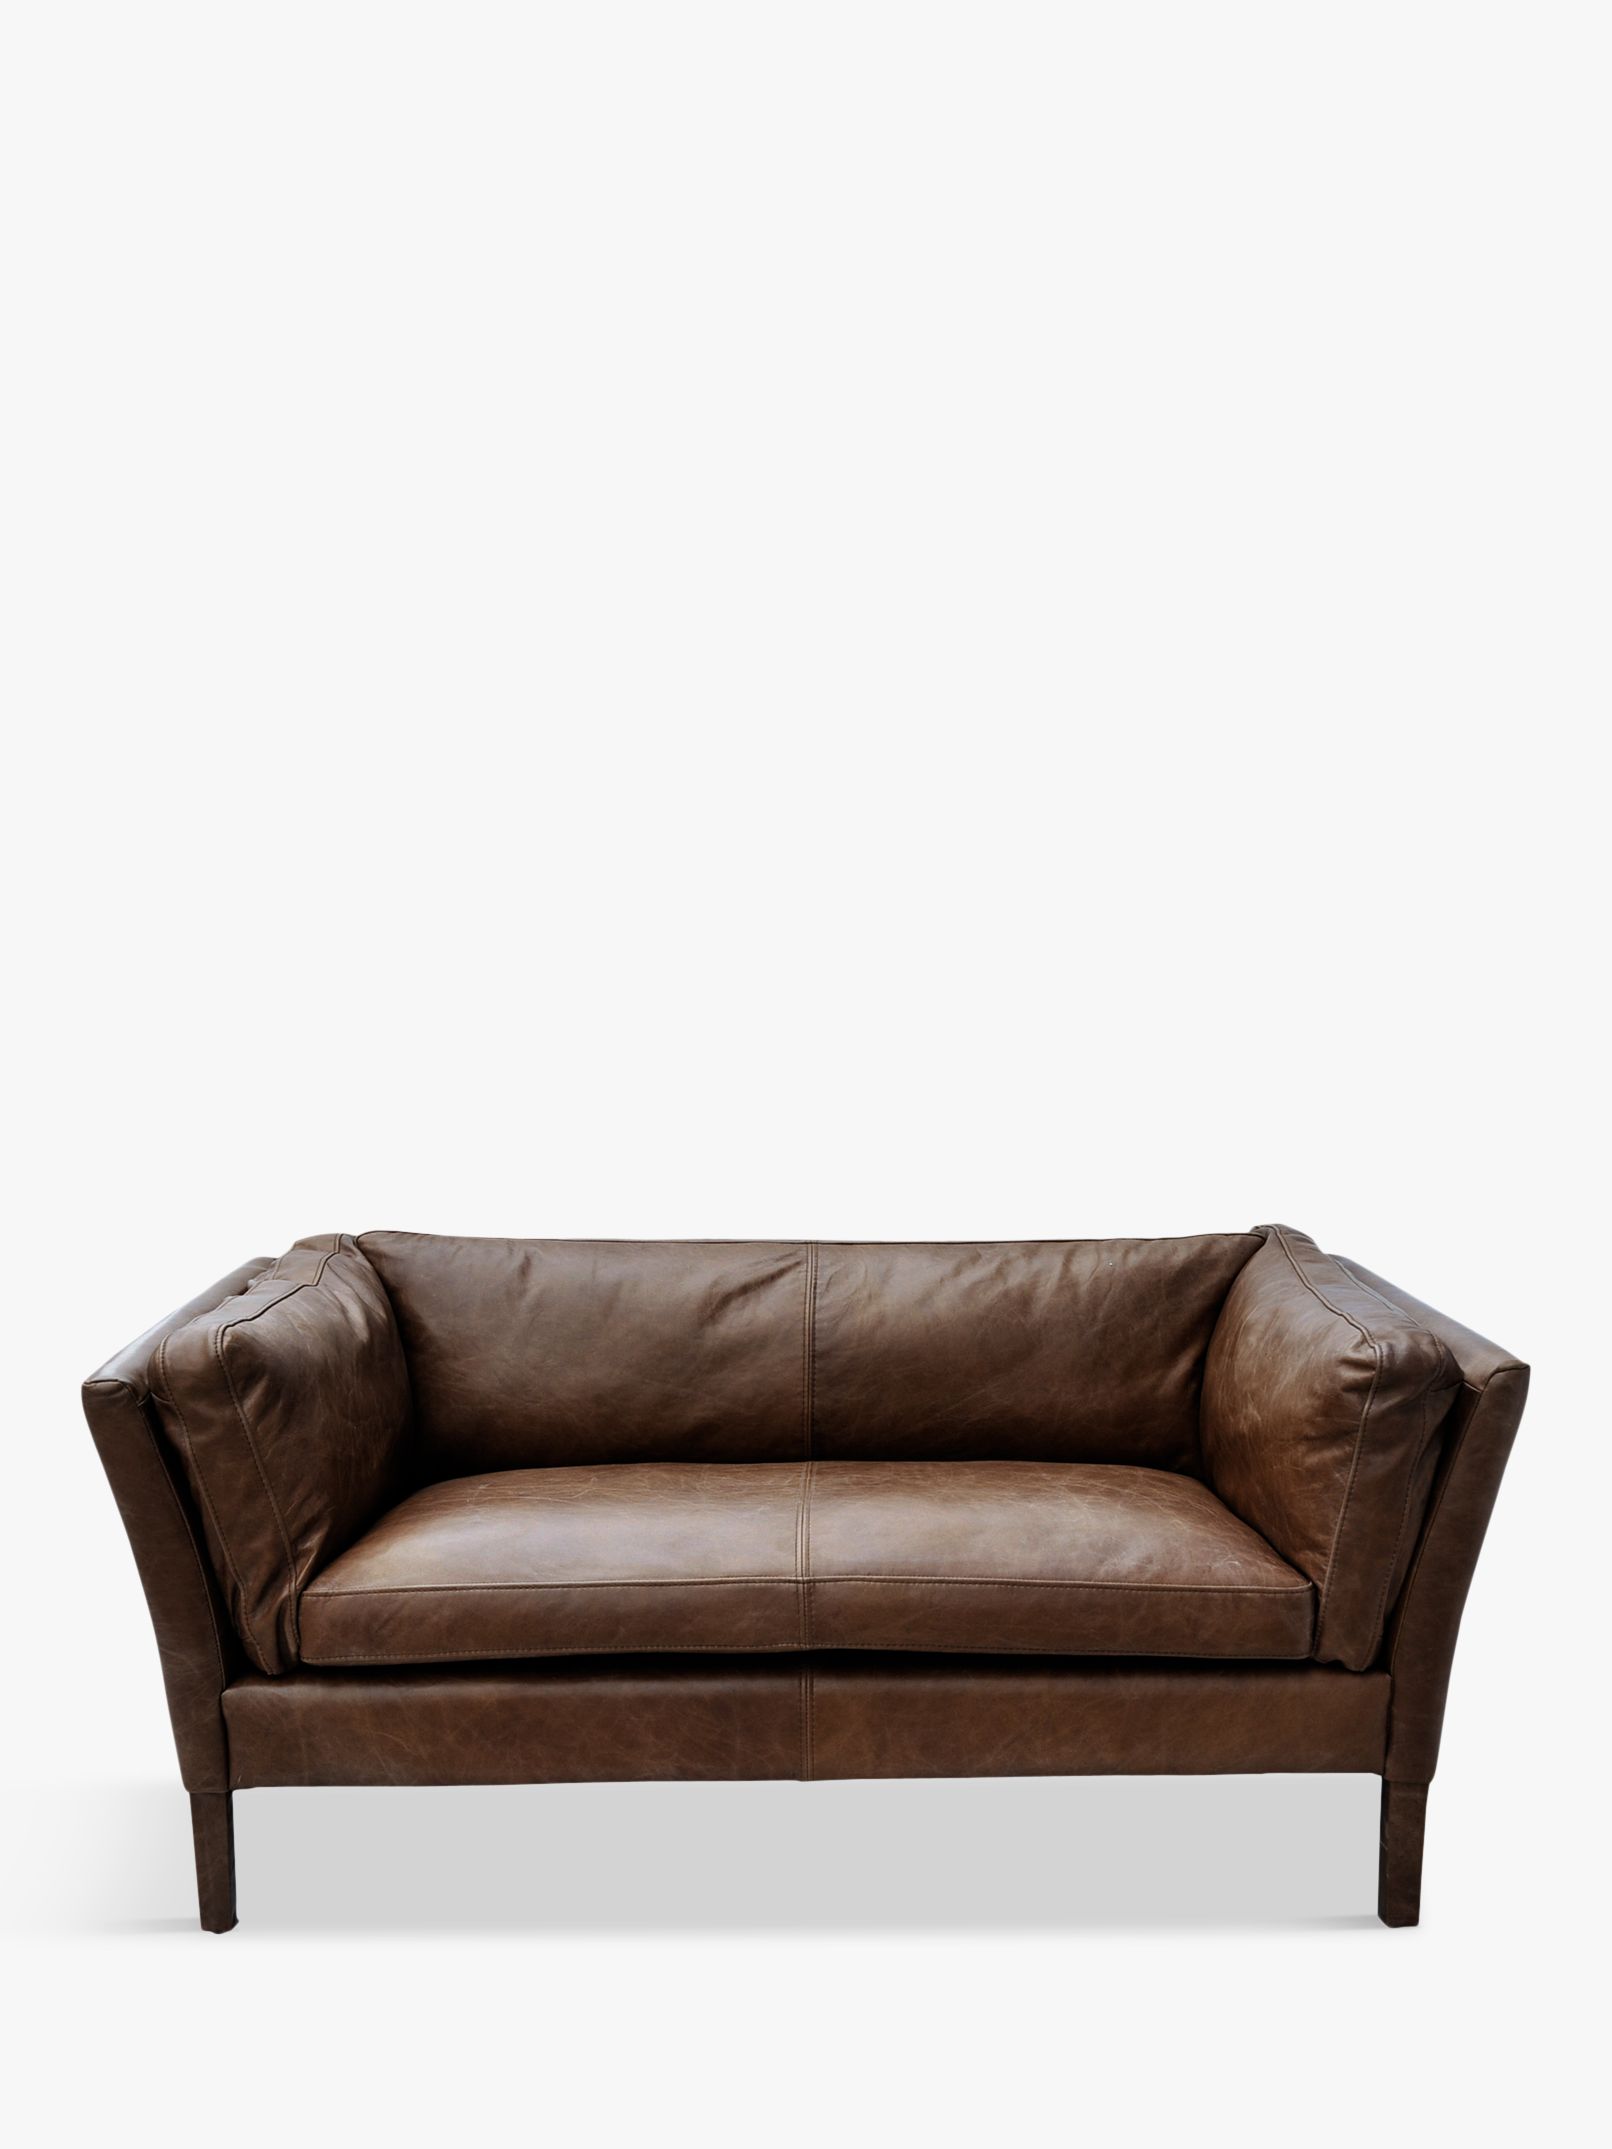 John Lewis Groucho Small Leather Sofa, Cocoa, width 152cm